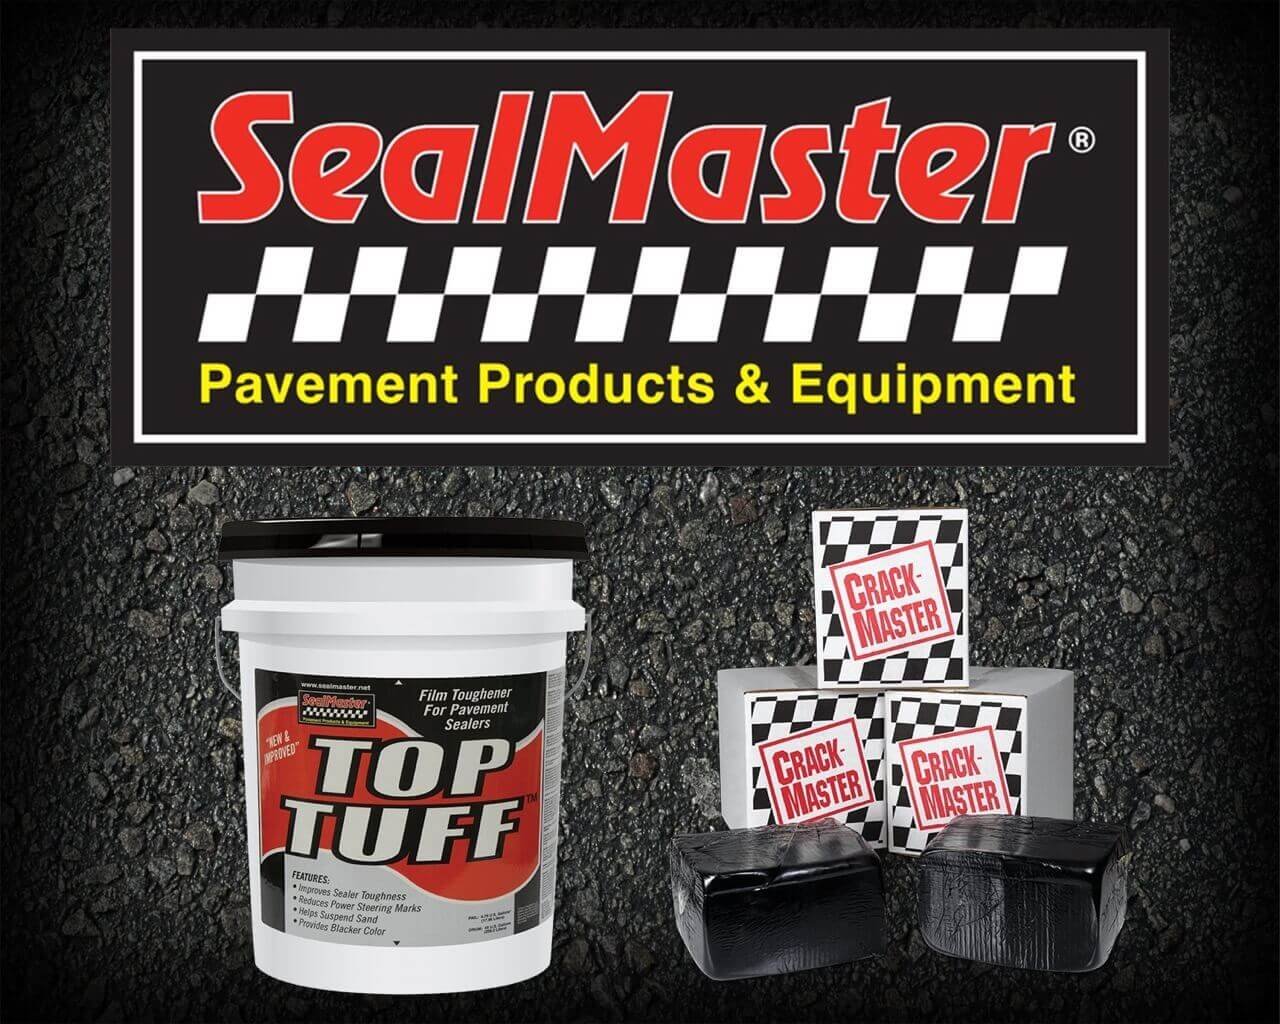 sealmaster+products+commercial Large.jpg